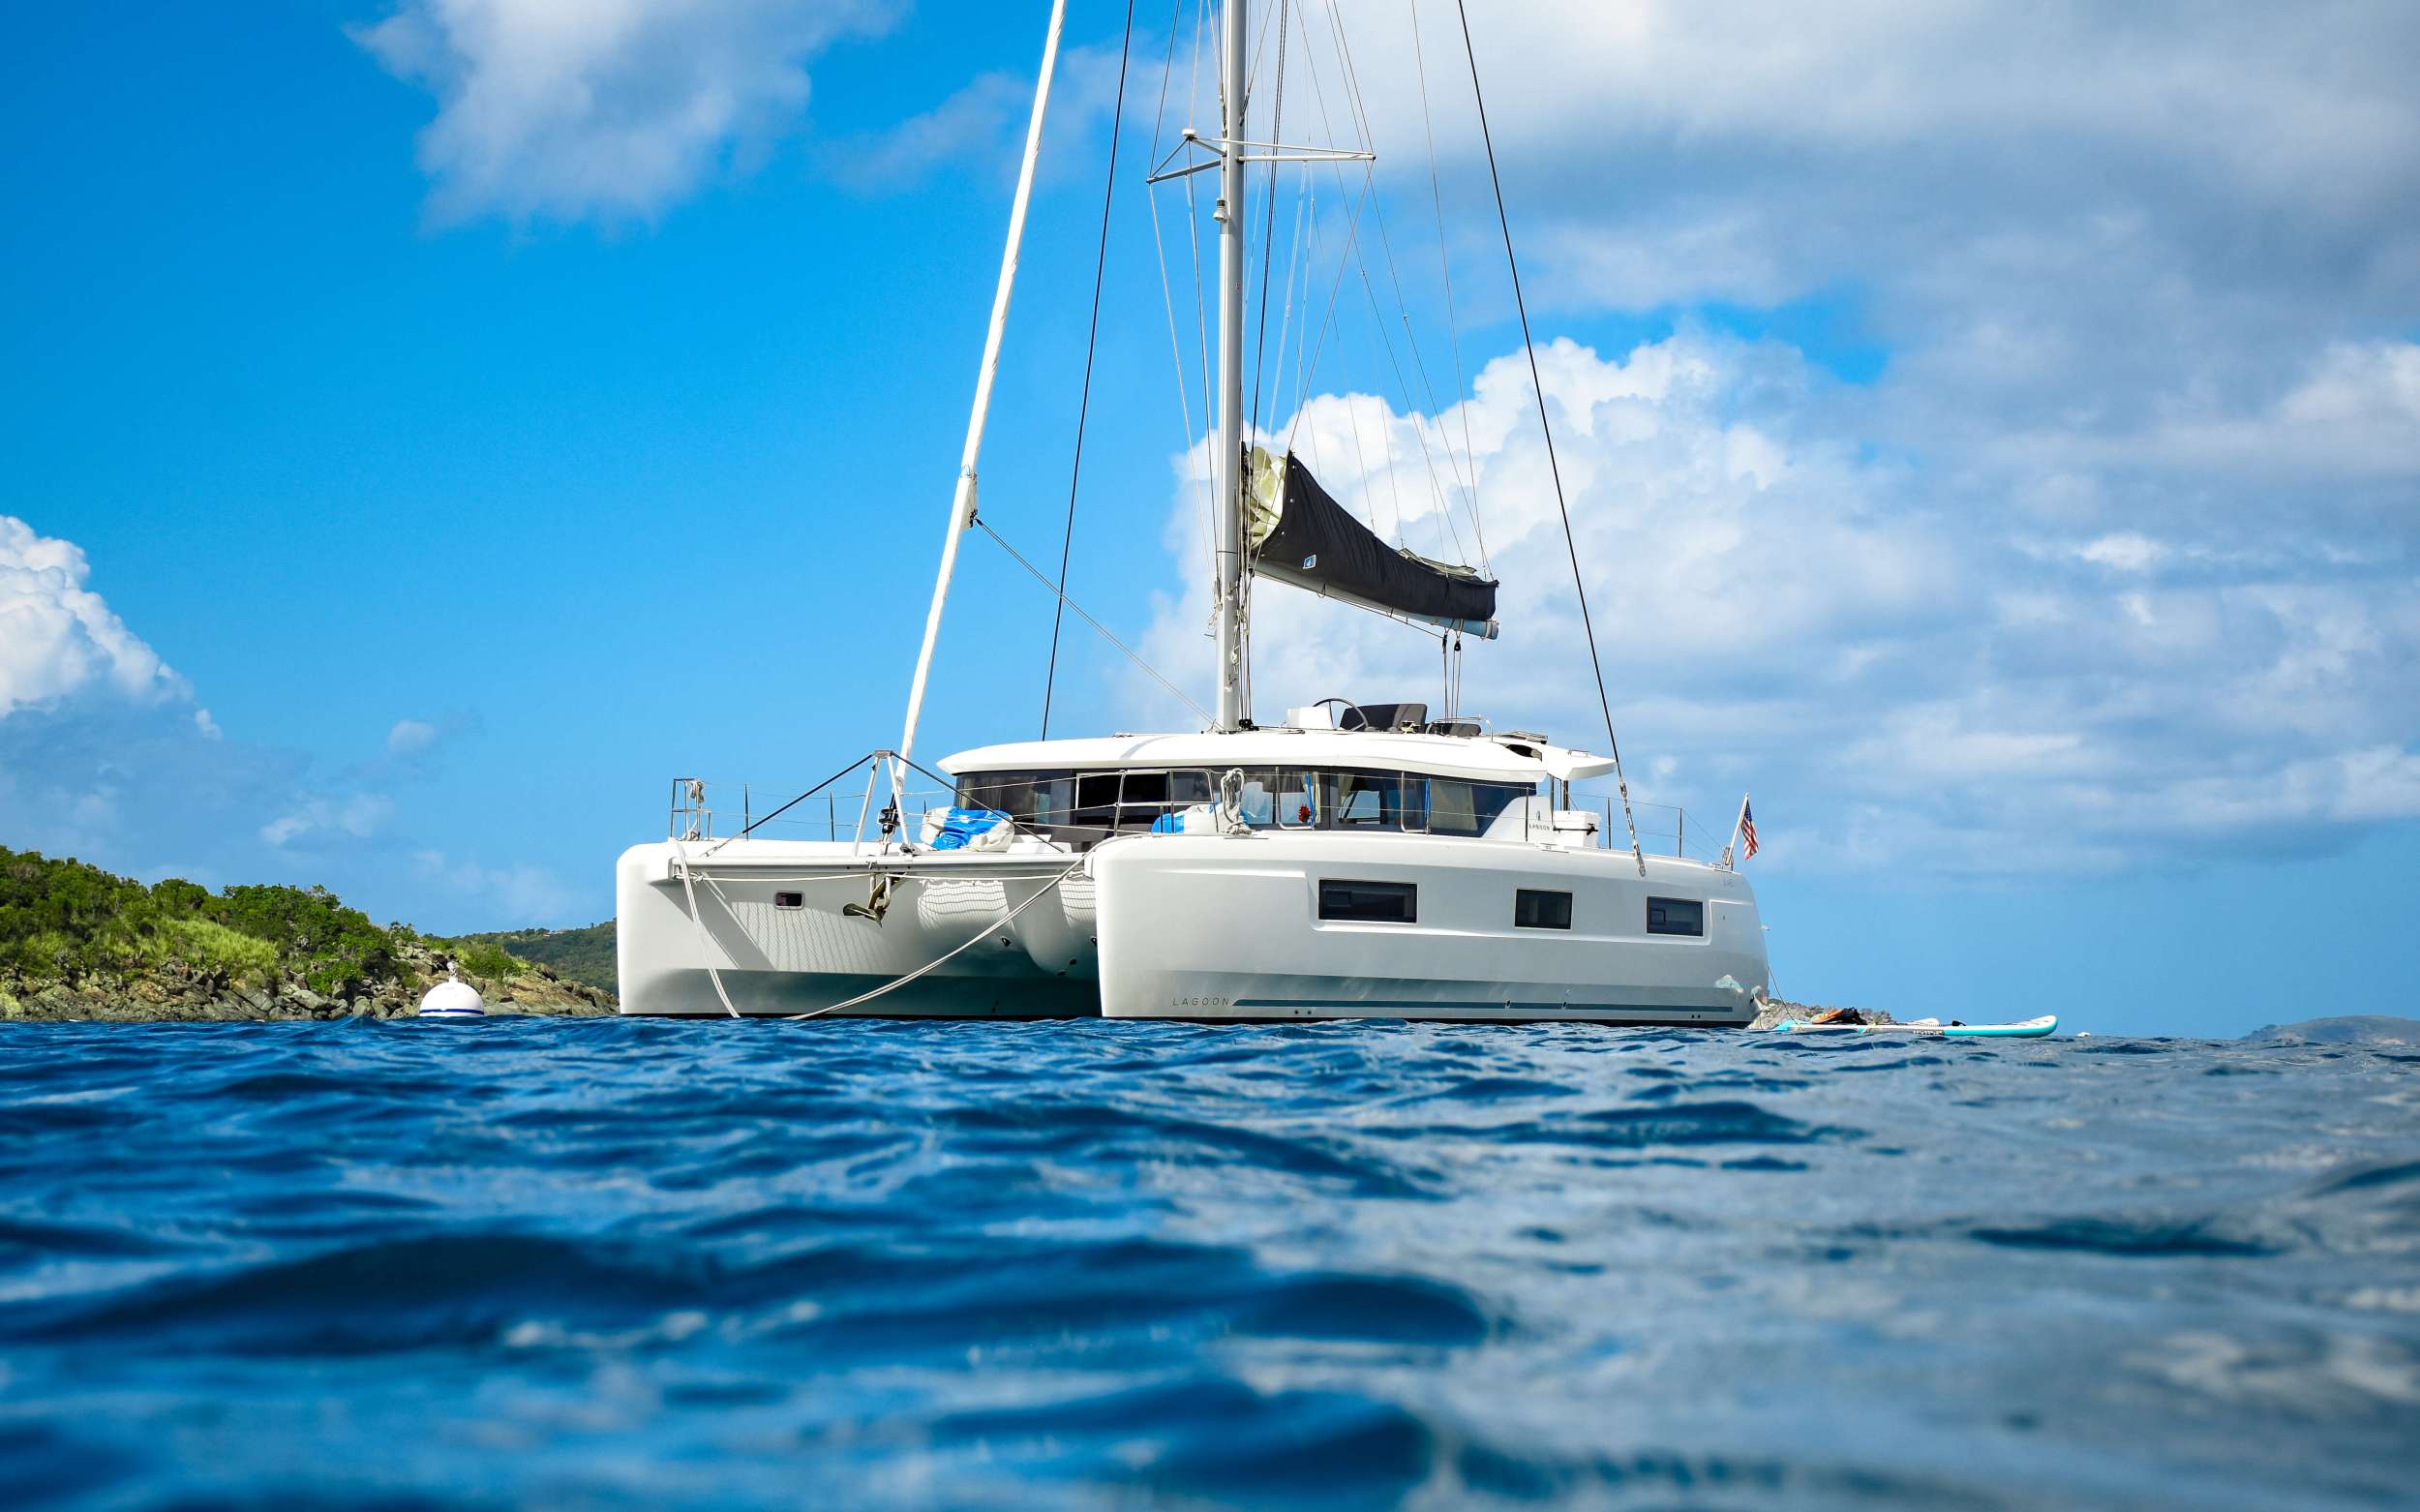 CELAVIE - Yacht Charter Antigua & Boat hire in Caribbean 2